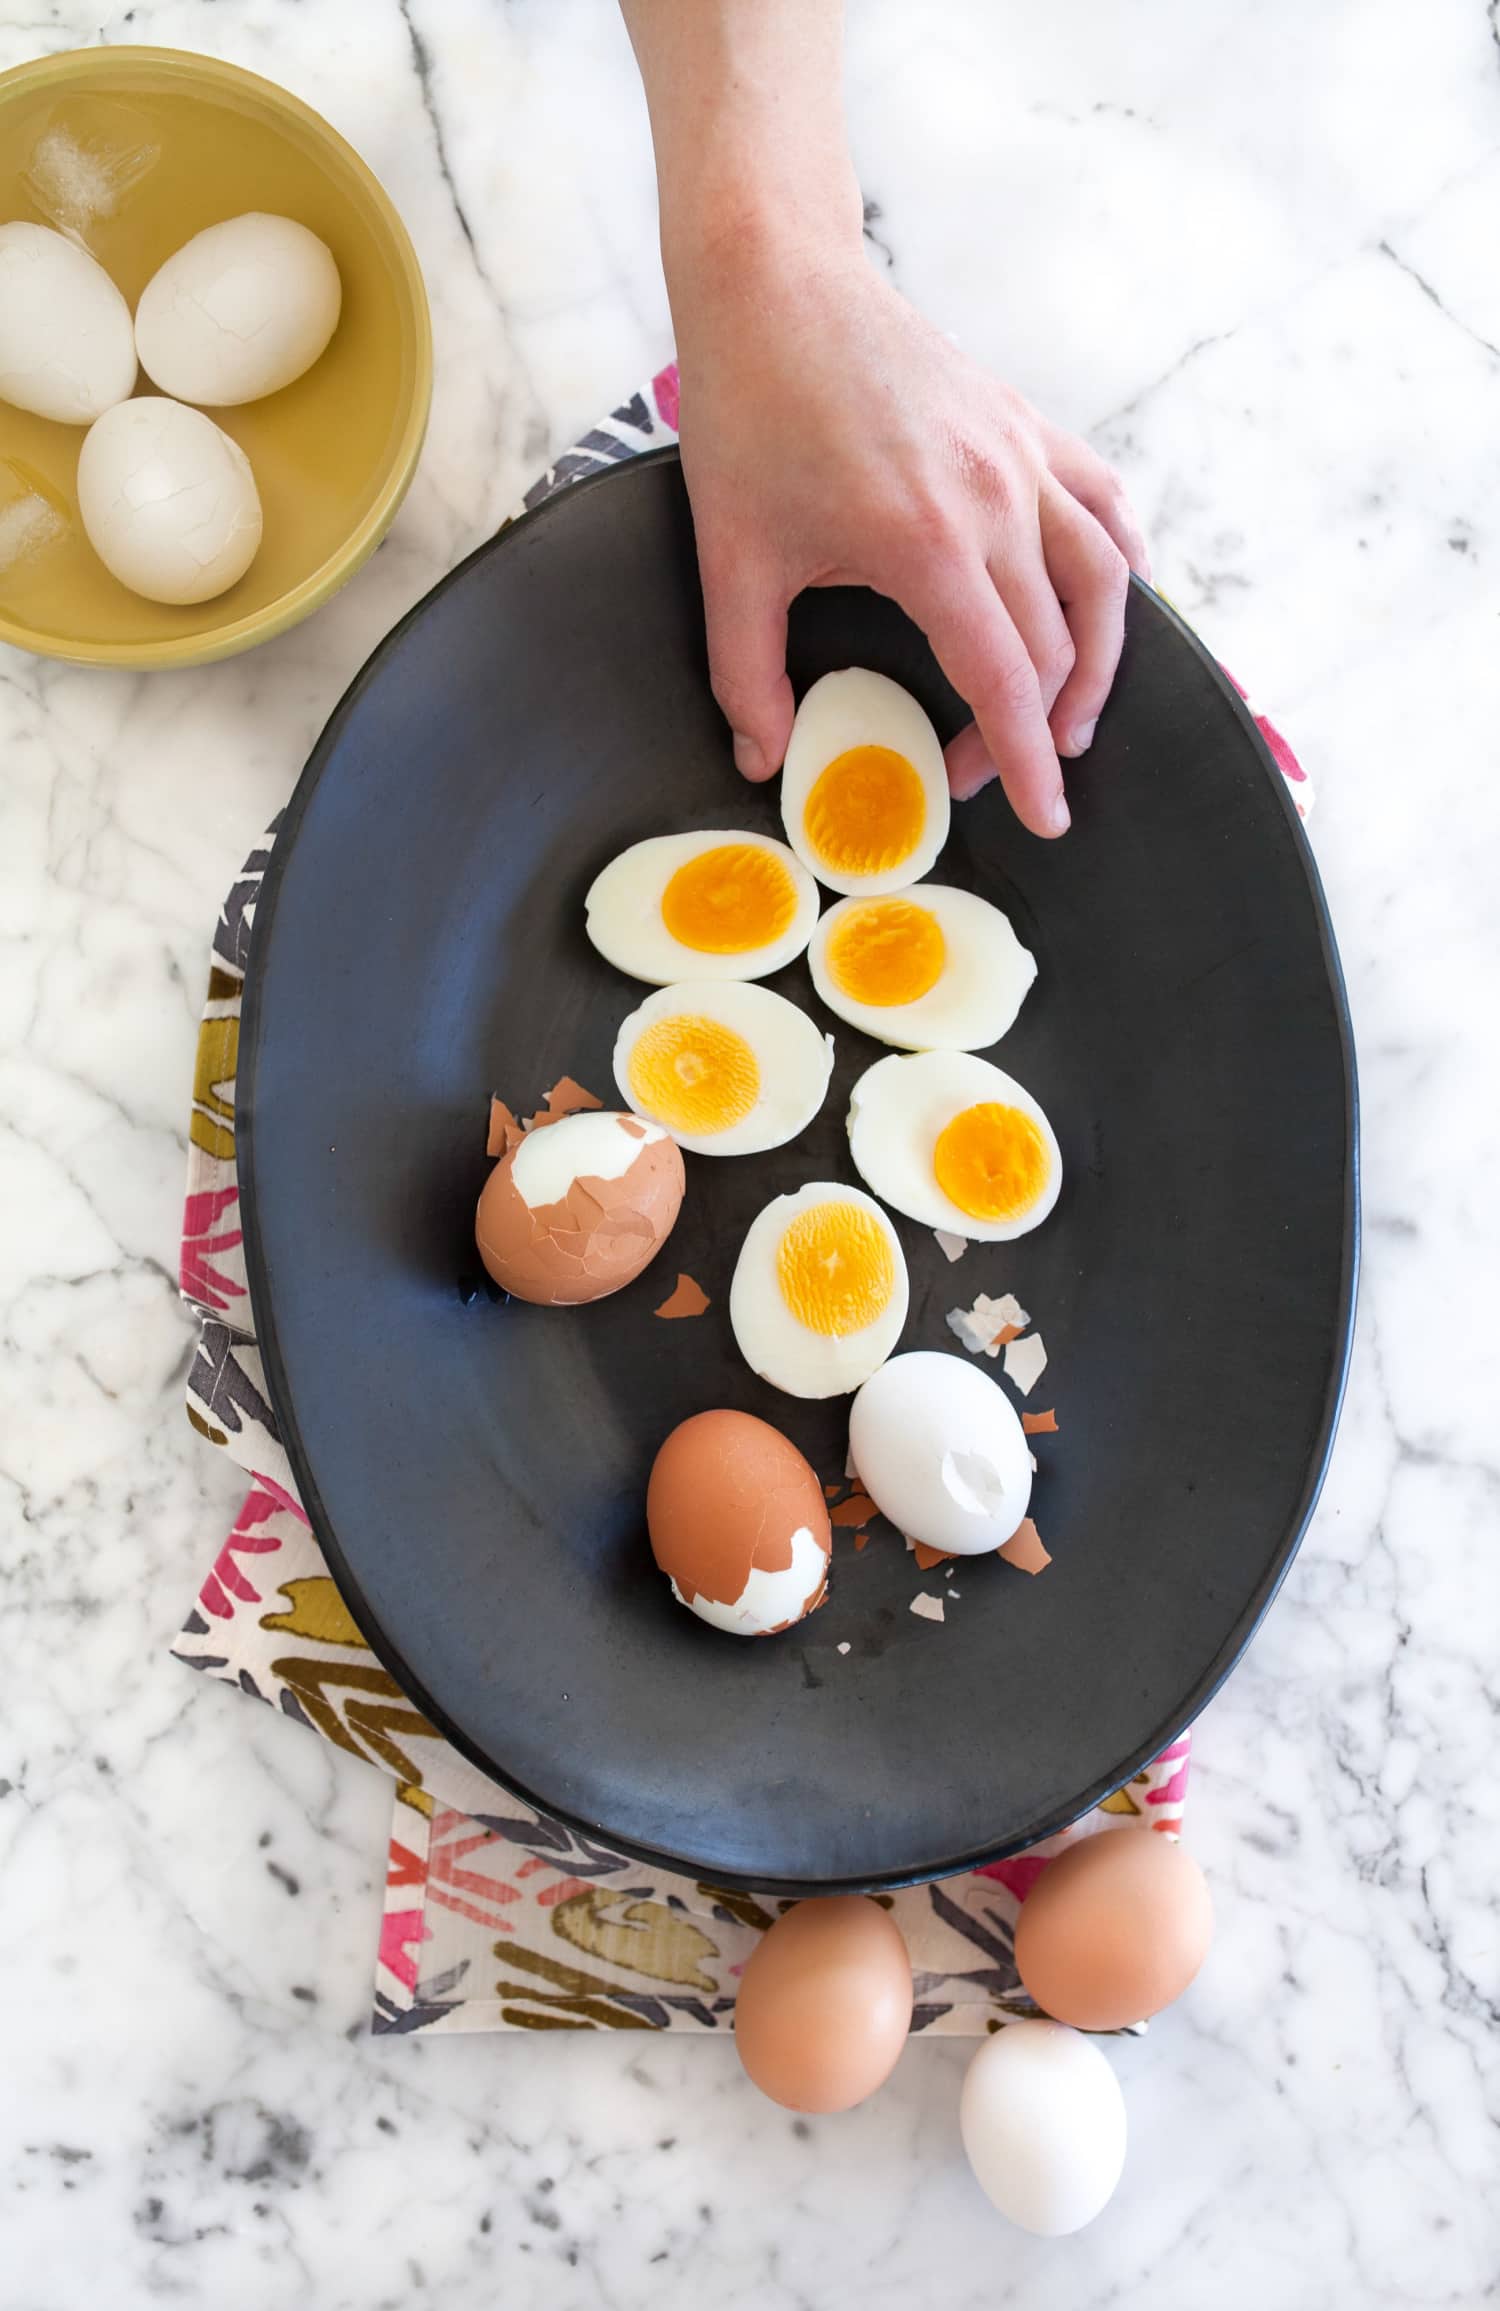 How To Hard Boil Eggs Perfectly Every Time Kitchn